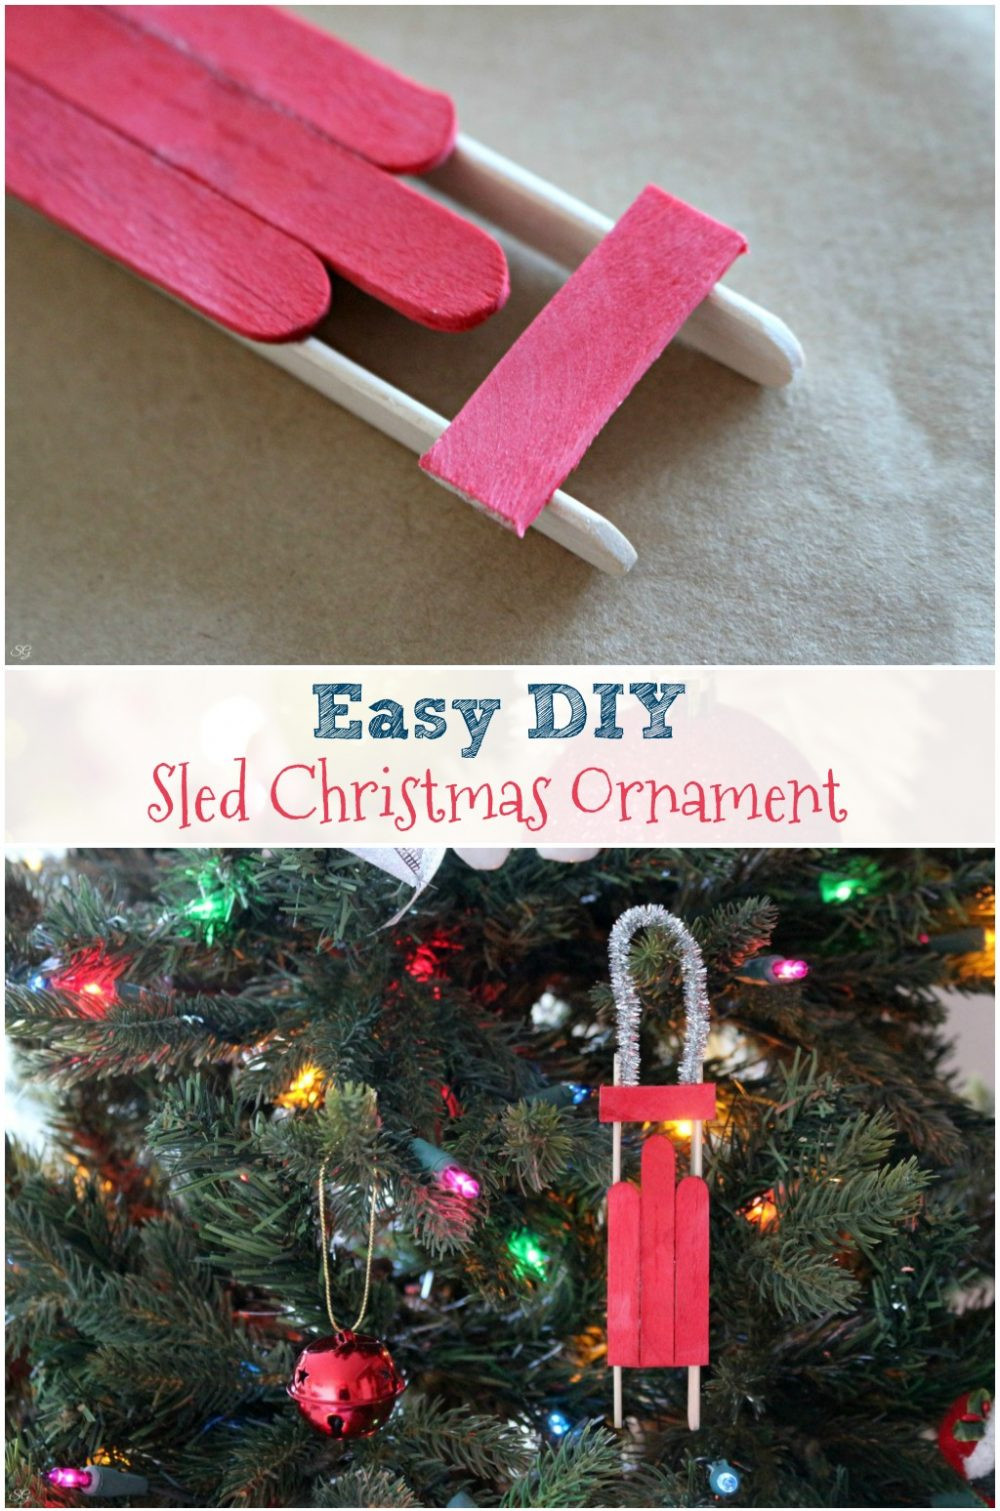 DIY Christmas Ornaments With Popsicle Sticks
 DIY Popsicle Stick Sled Ornament Scrappy Geek